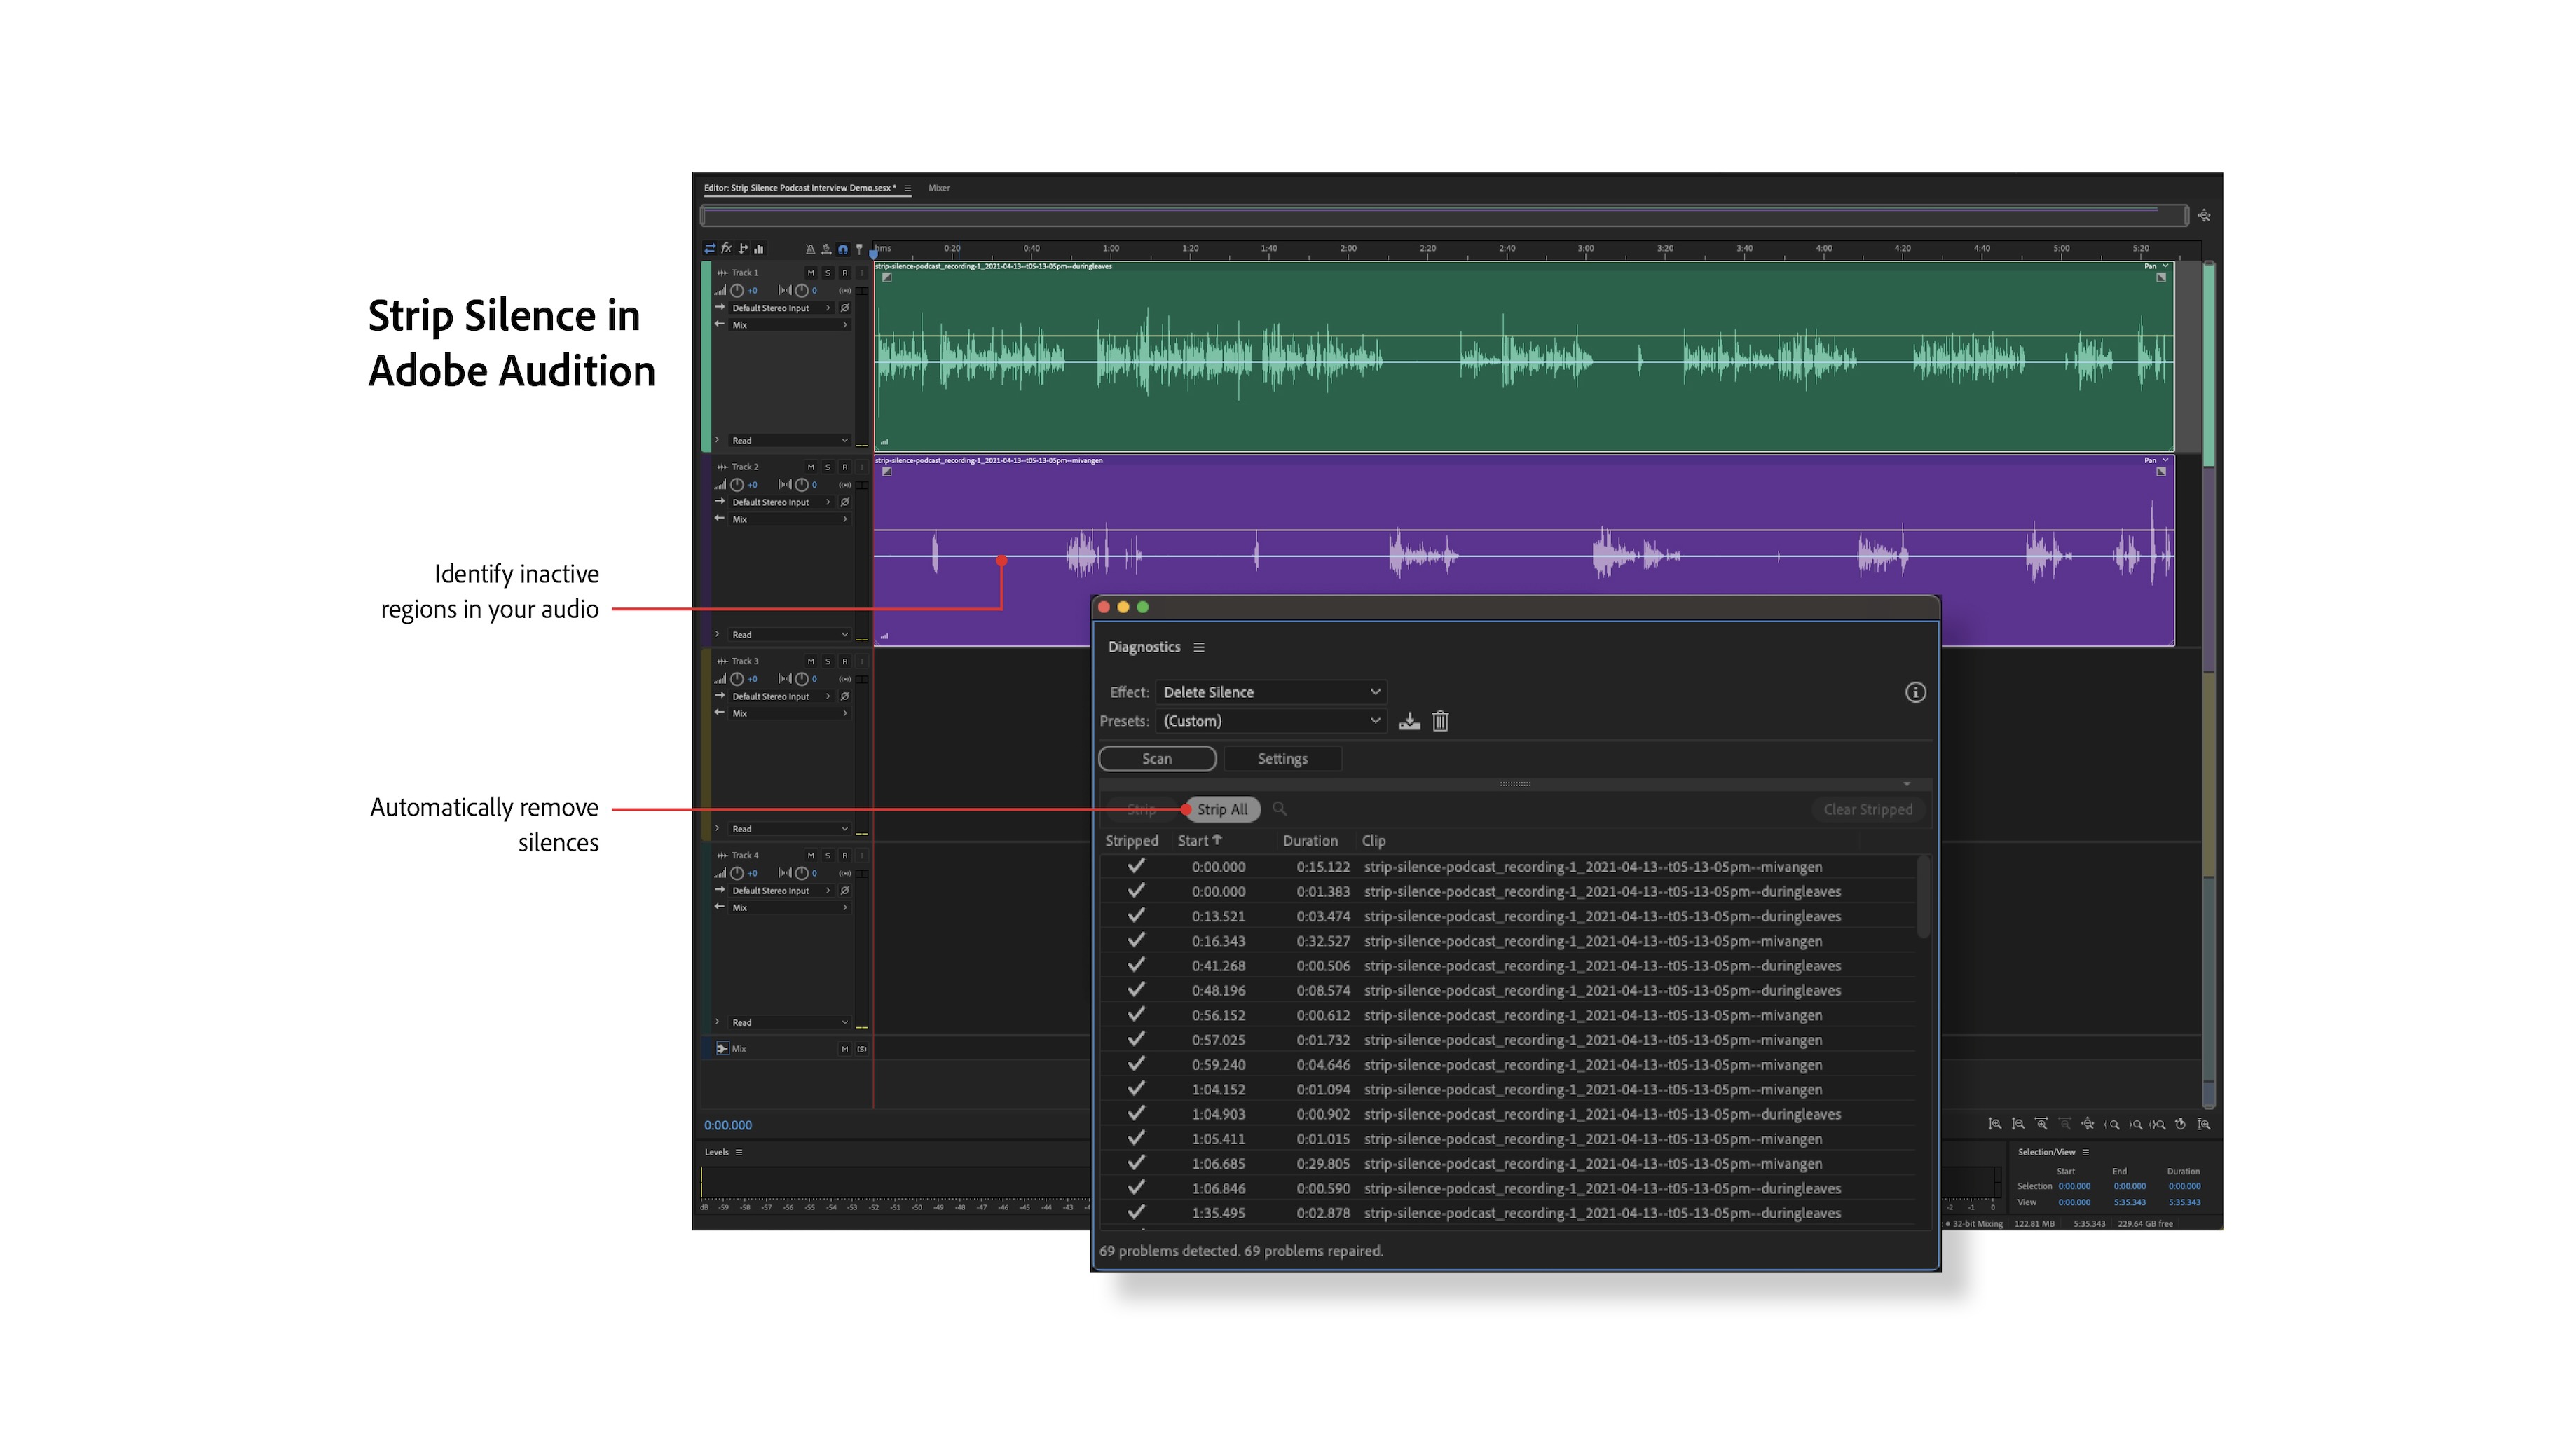 adobe audition 3.0 troubleshooting